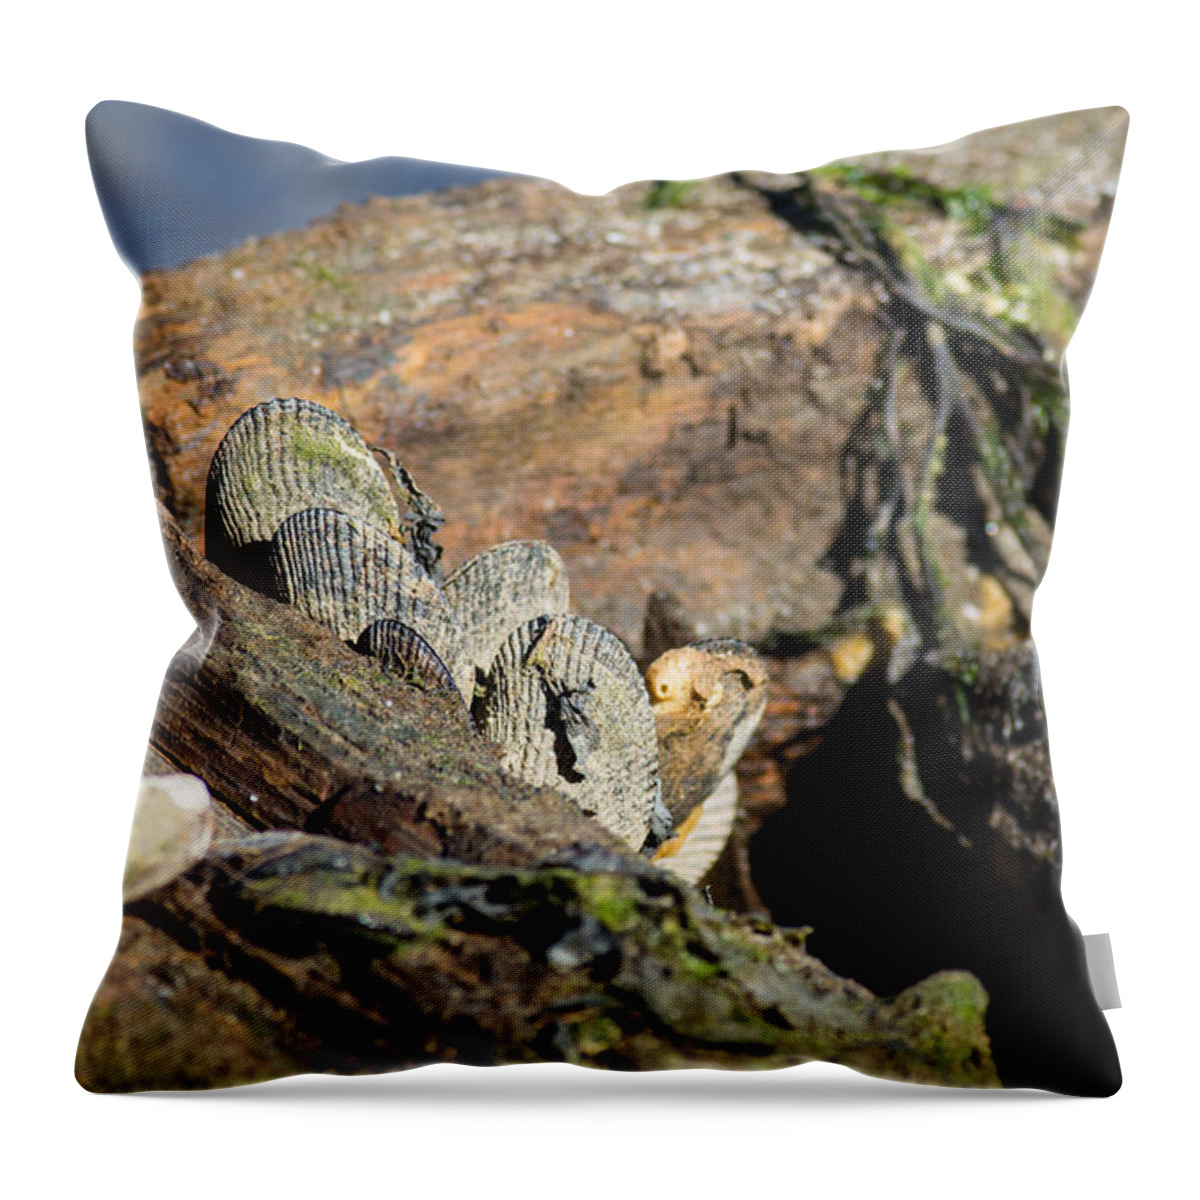 Mussel Shells Throw Pillow featuring the photograph The Old Pier by Allan Morrison